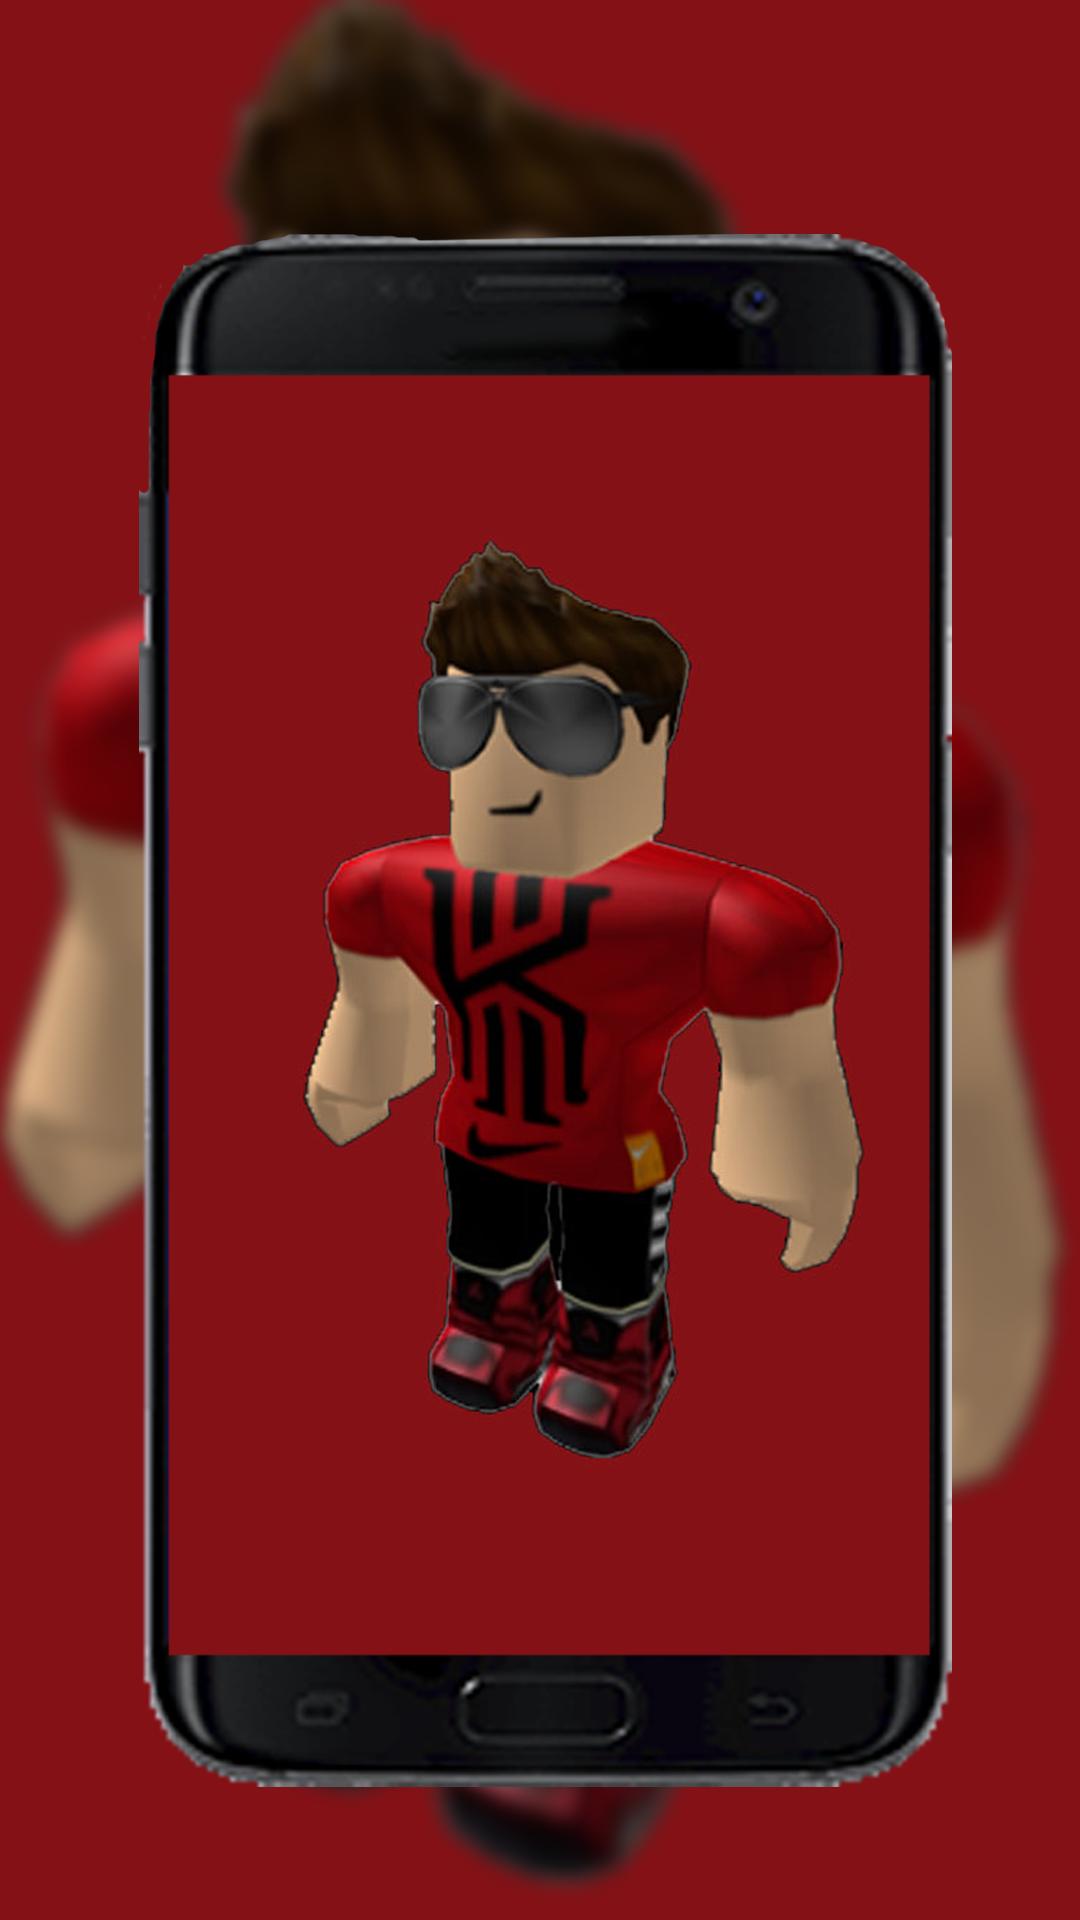 Cool Roblox Wallpaper 4k 2019 For Android Apk Download - wallpaper roblox cool kids